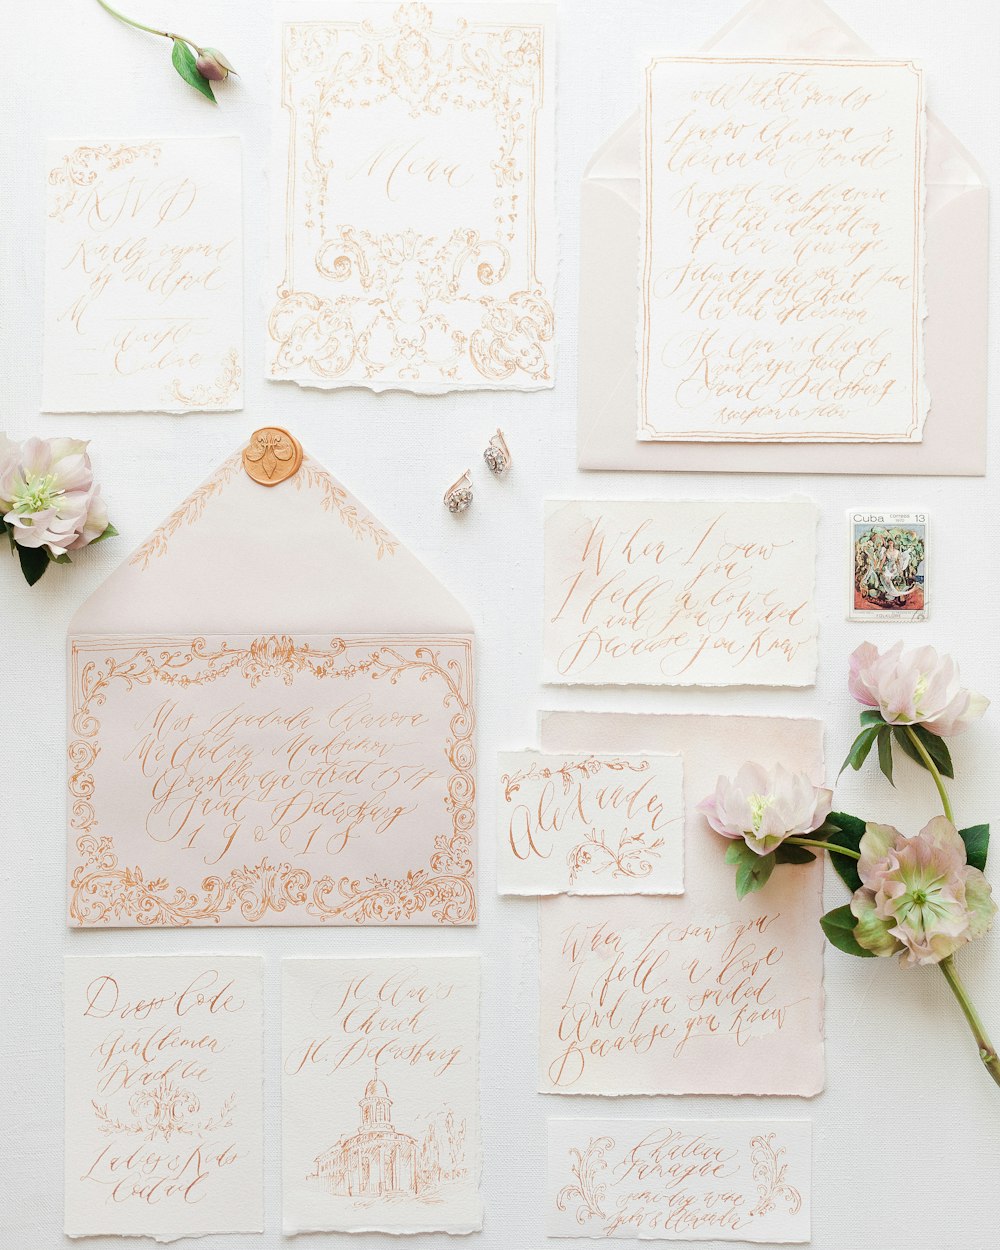 wedding stationery and envelopes laid out on a table